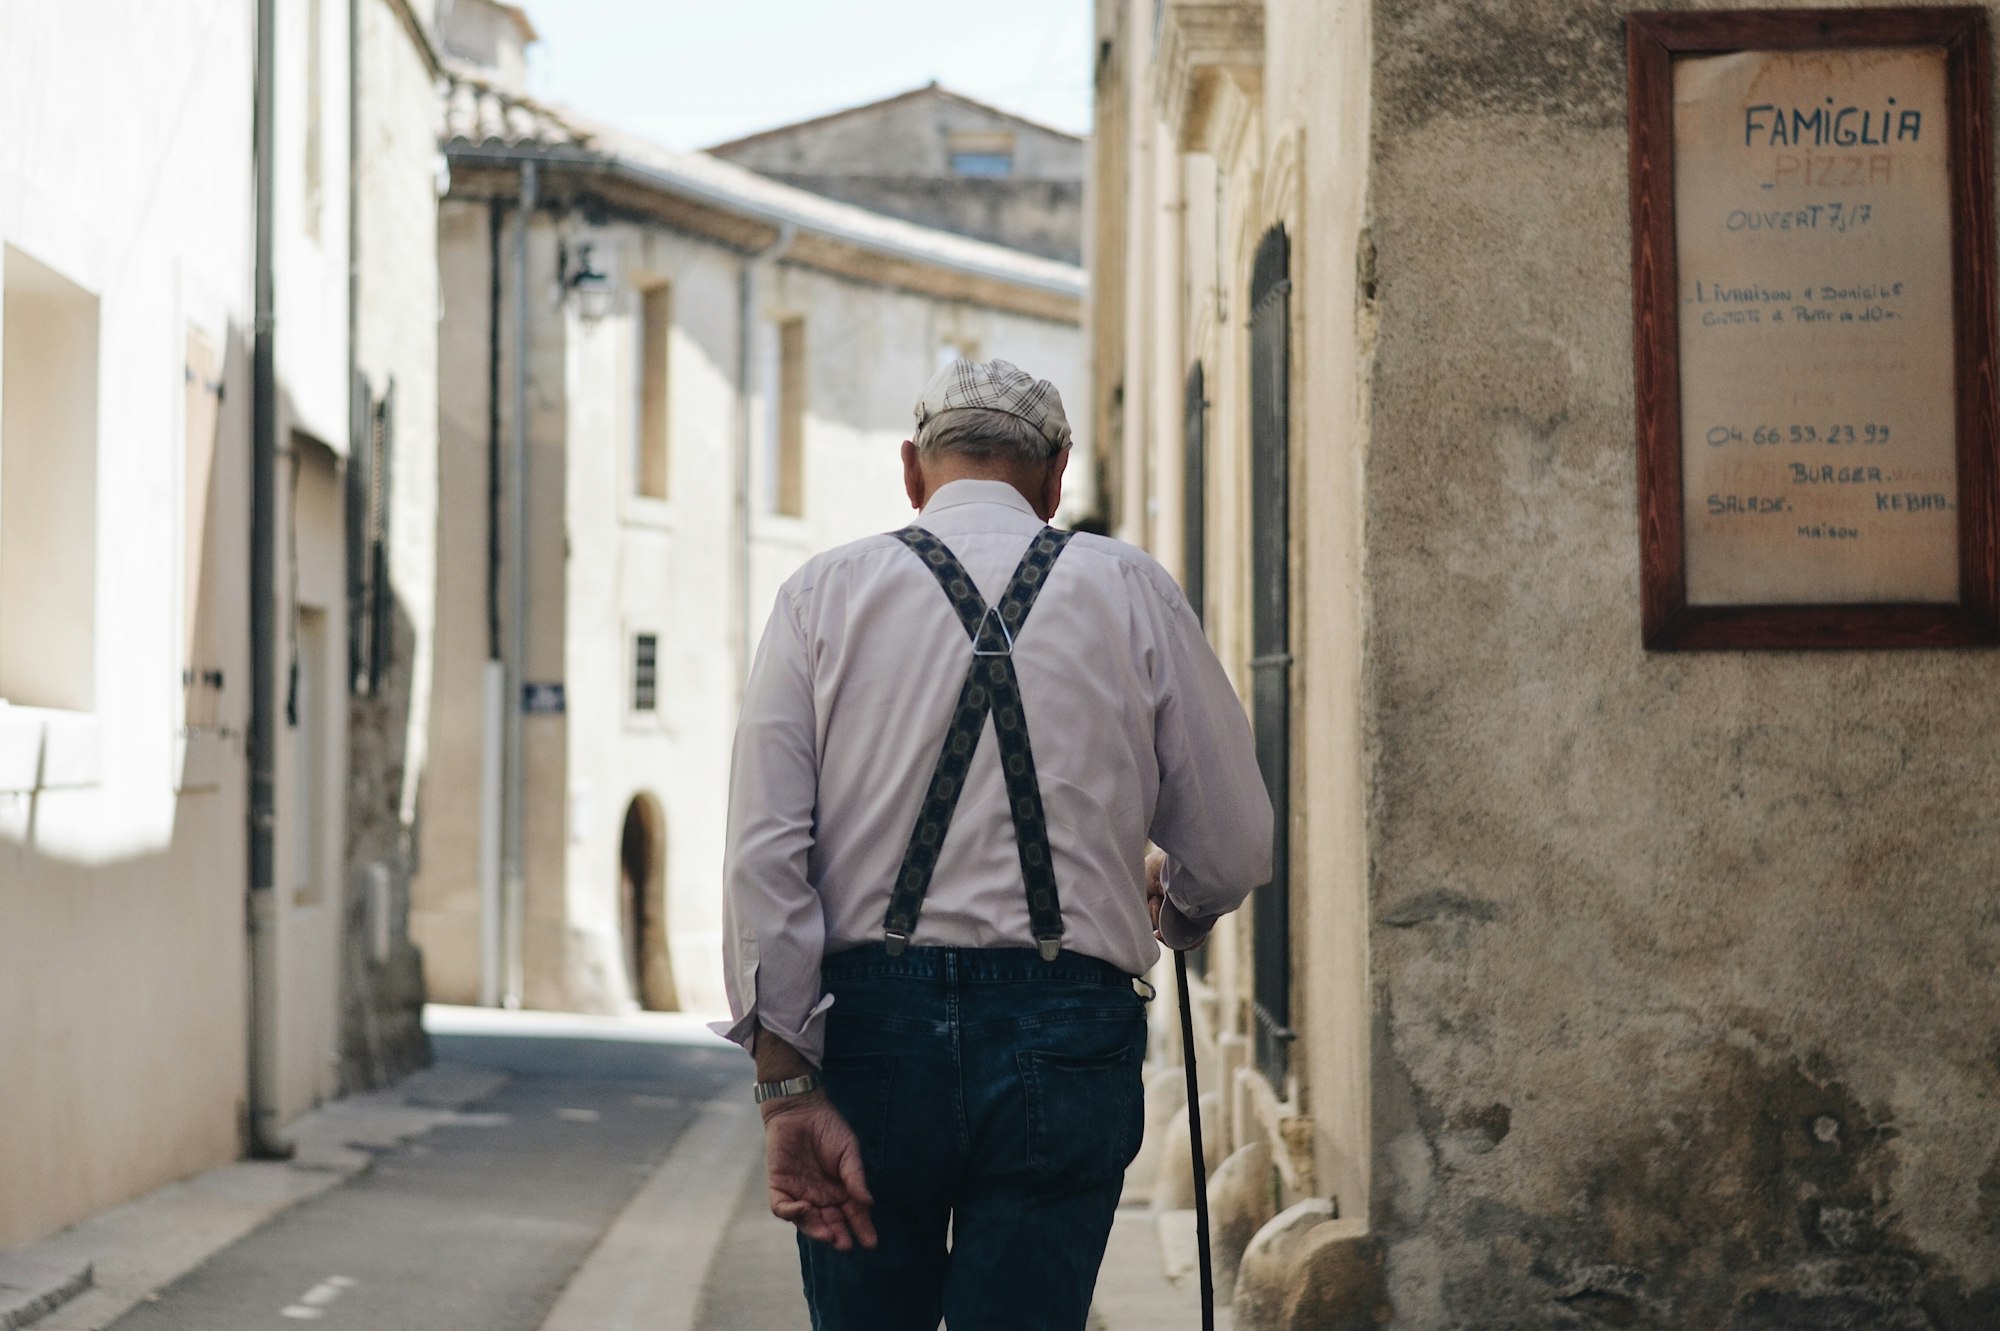 The back of the old man walking in the street